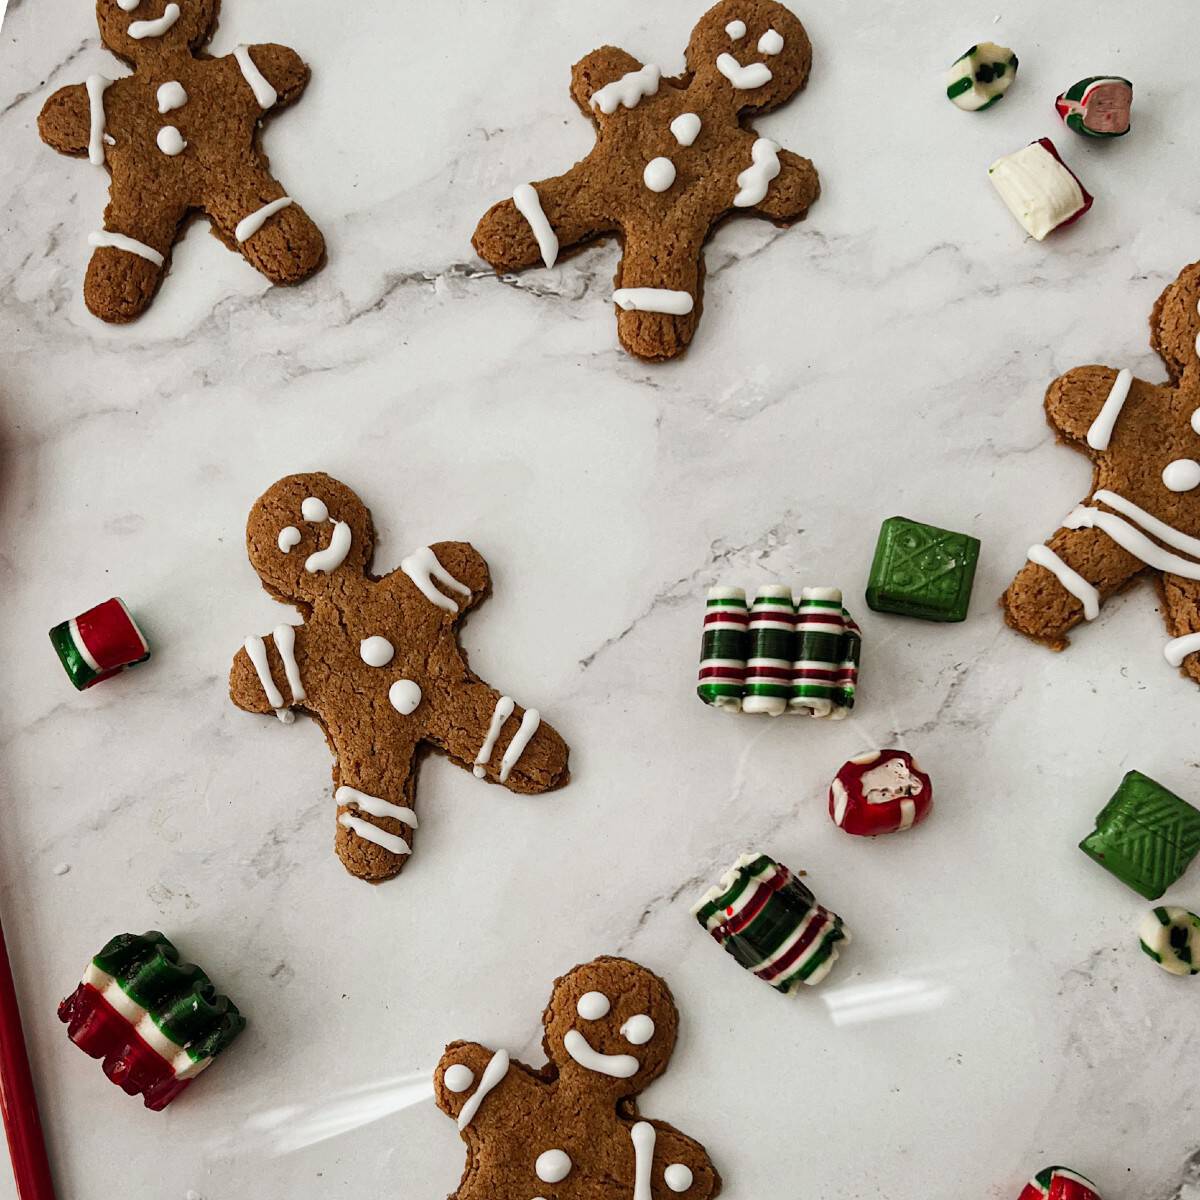 bake and cool then decorate gingerbread cookies